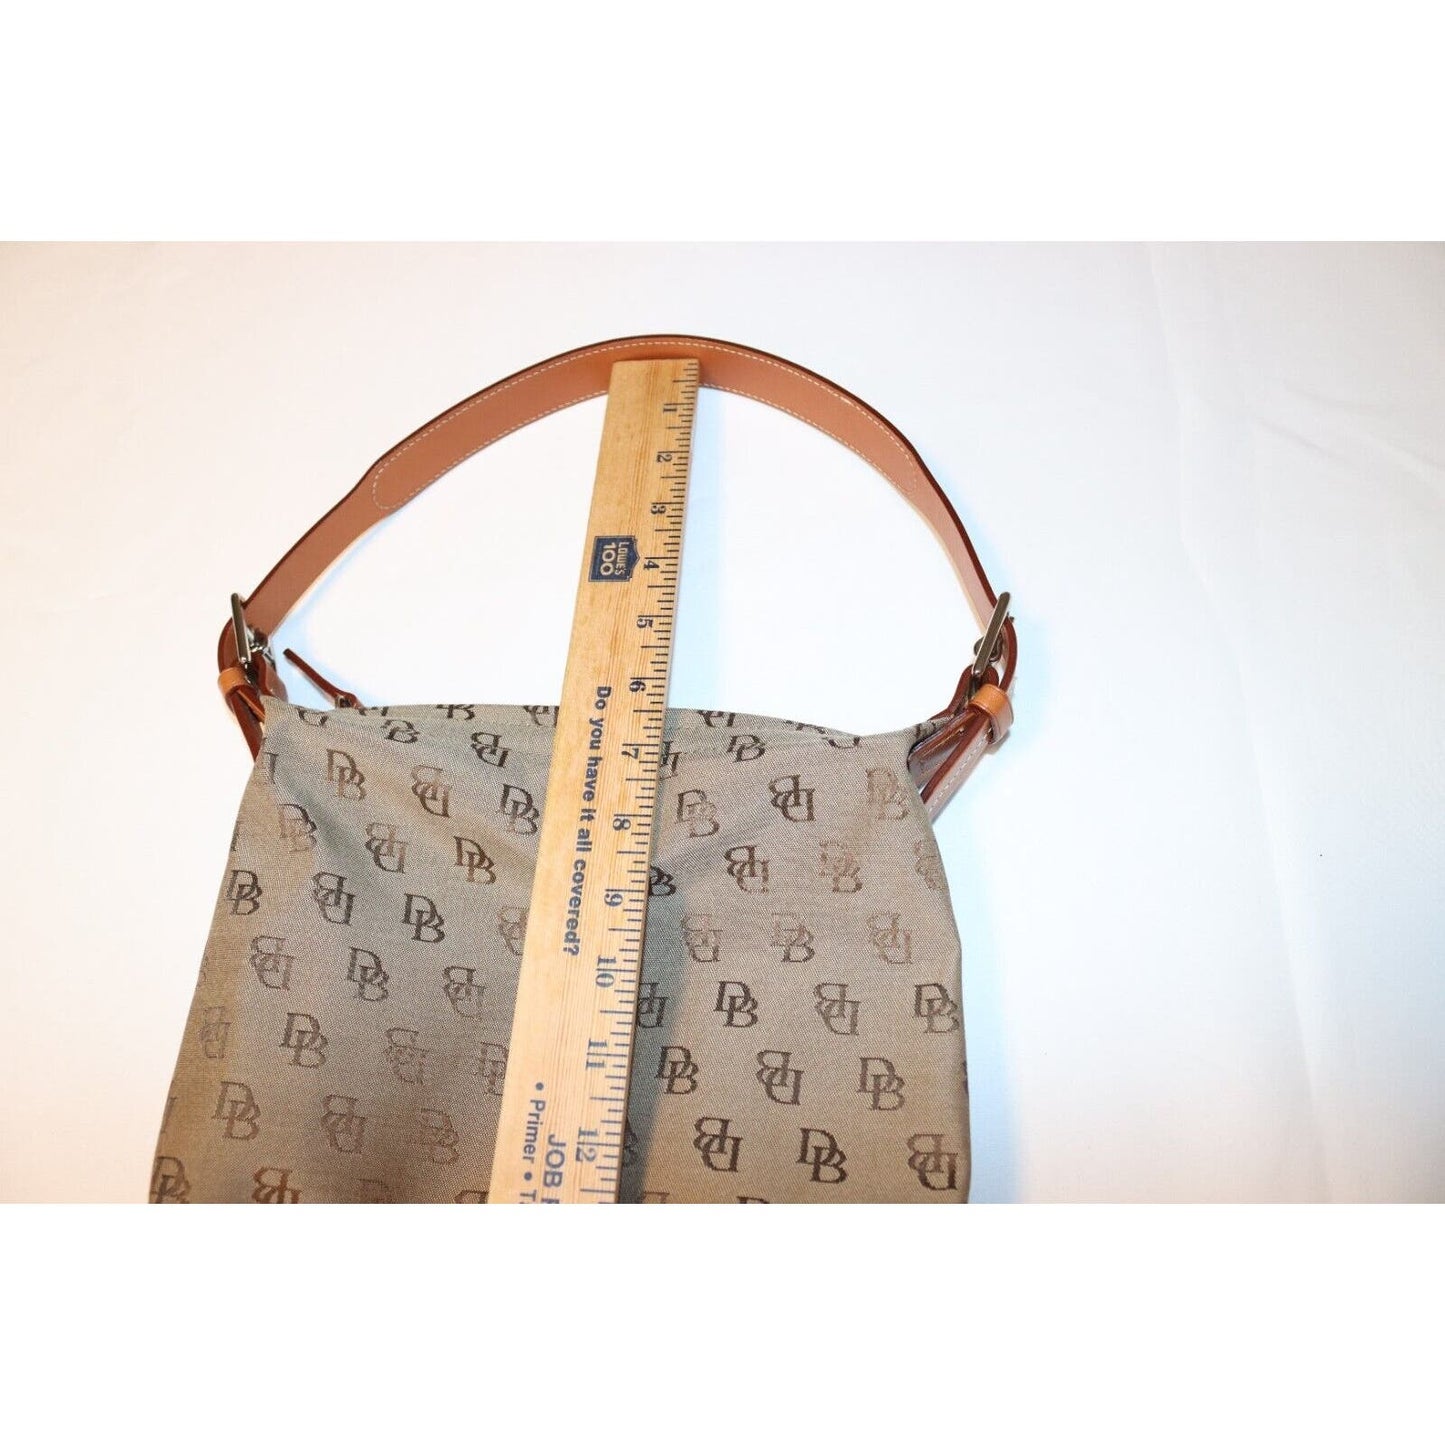 Dooney and Bourke Small Bag Shoulder Canvas and Leather Bag